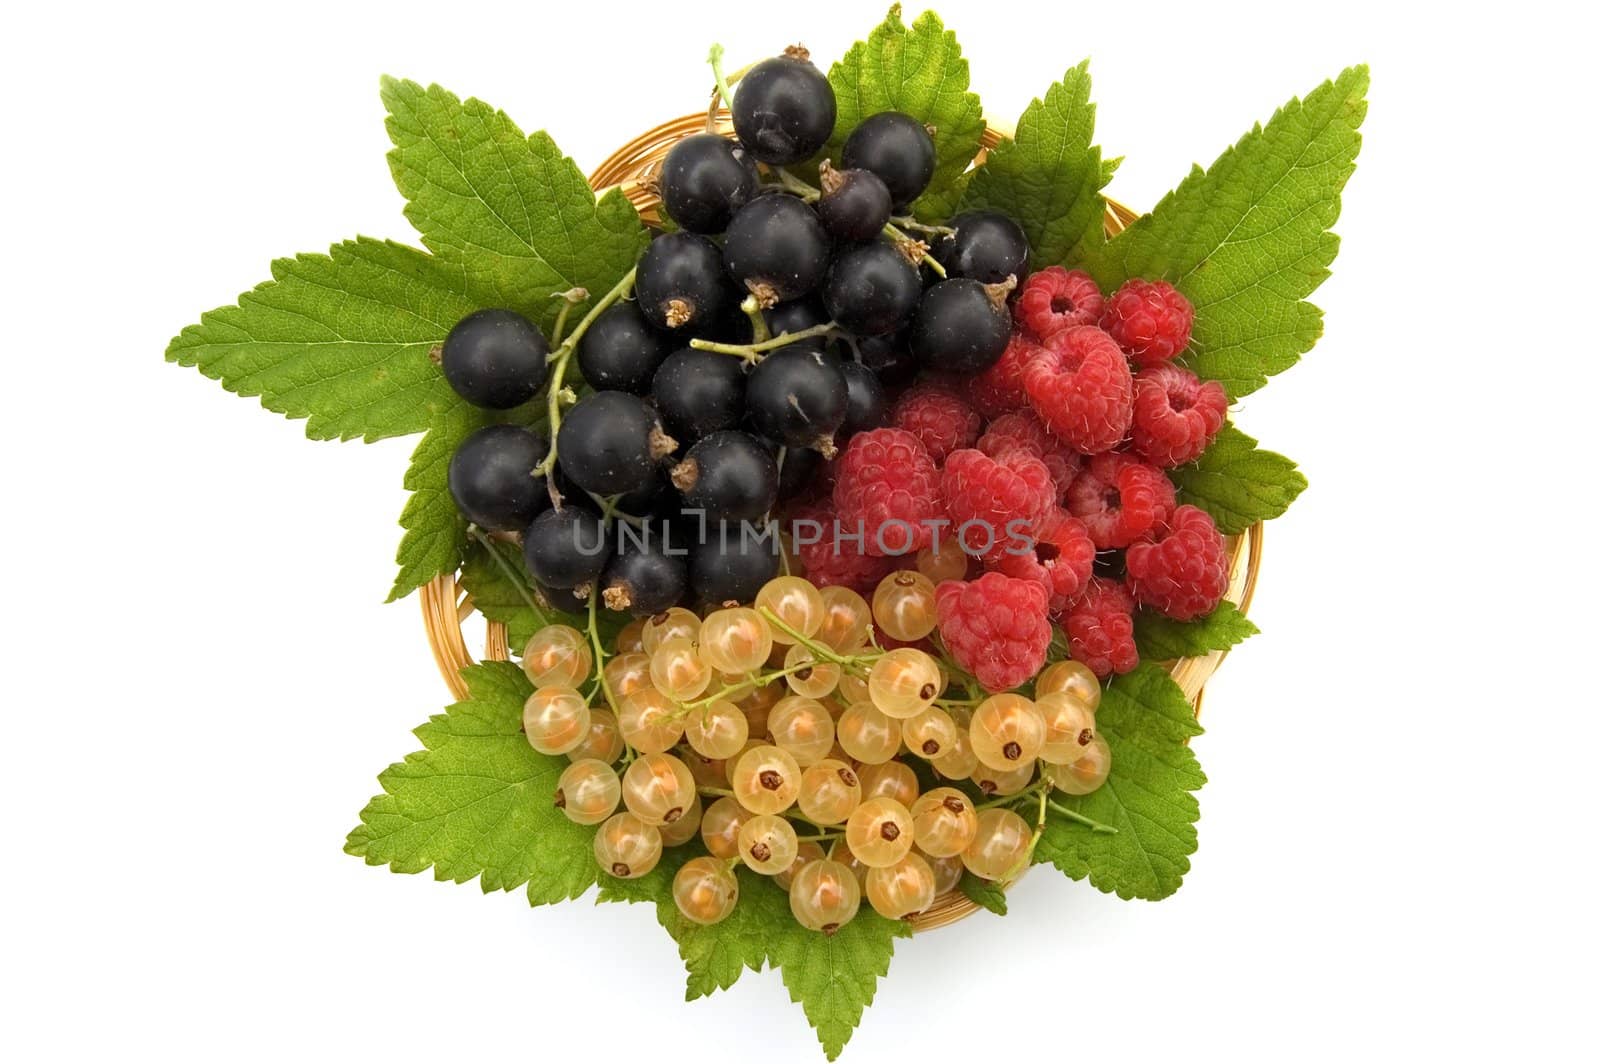 White and Black currant, red raspberry, currant, green leaves in a wicker plate isolated on a white background